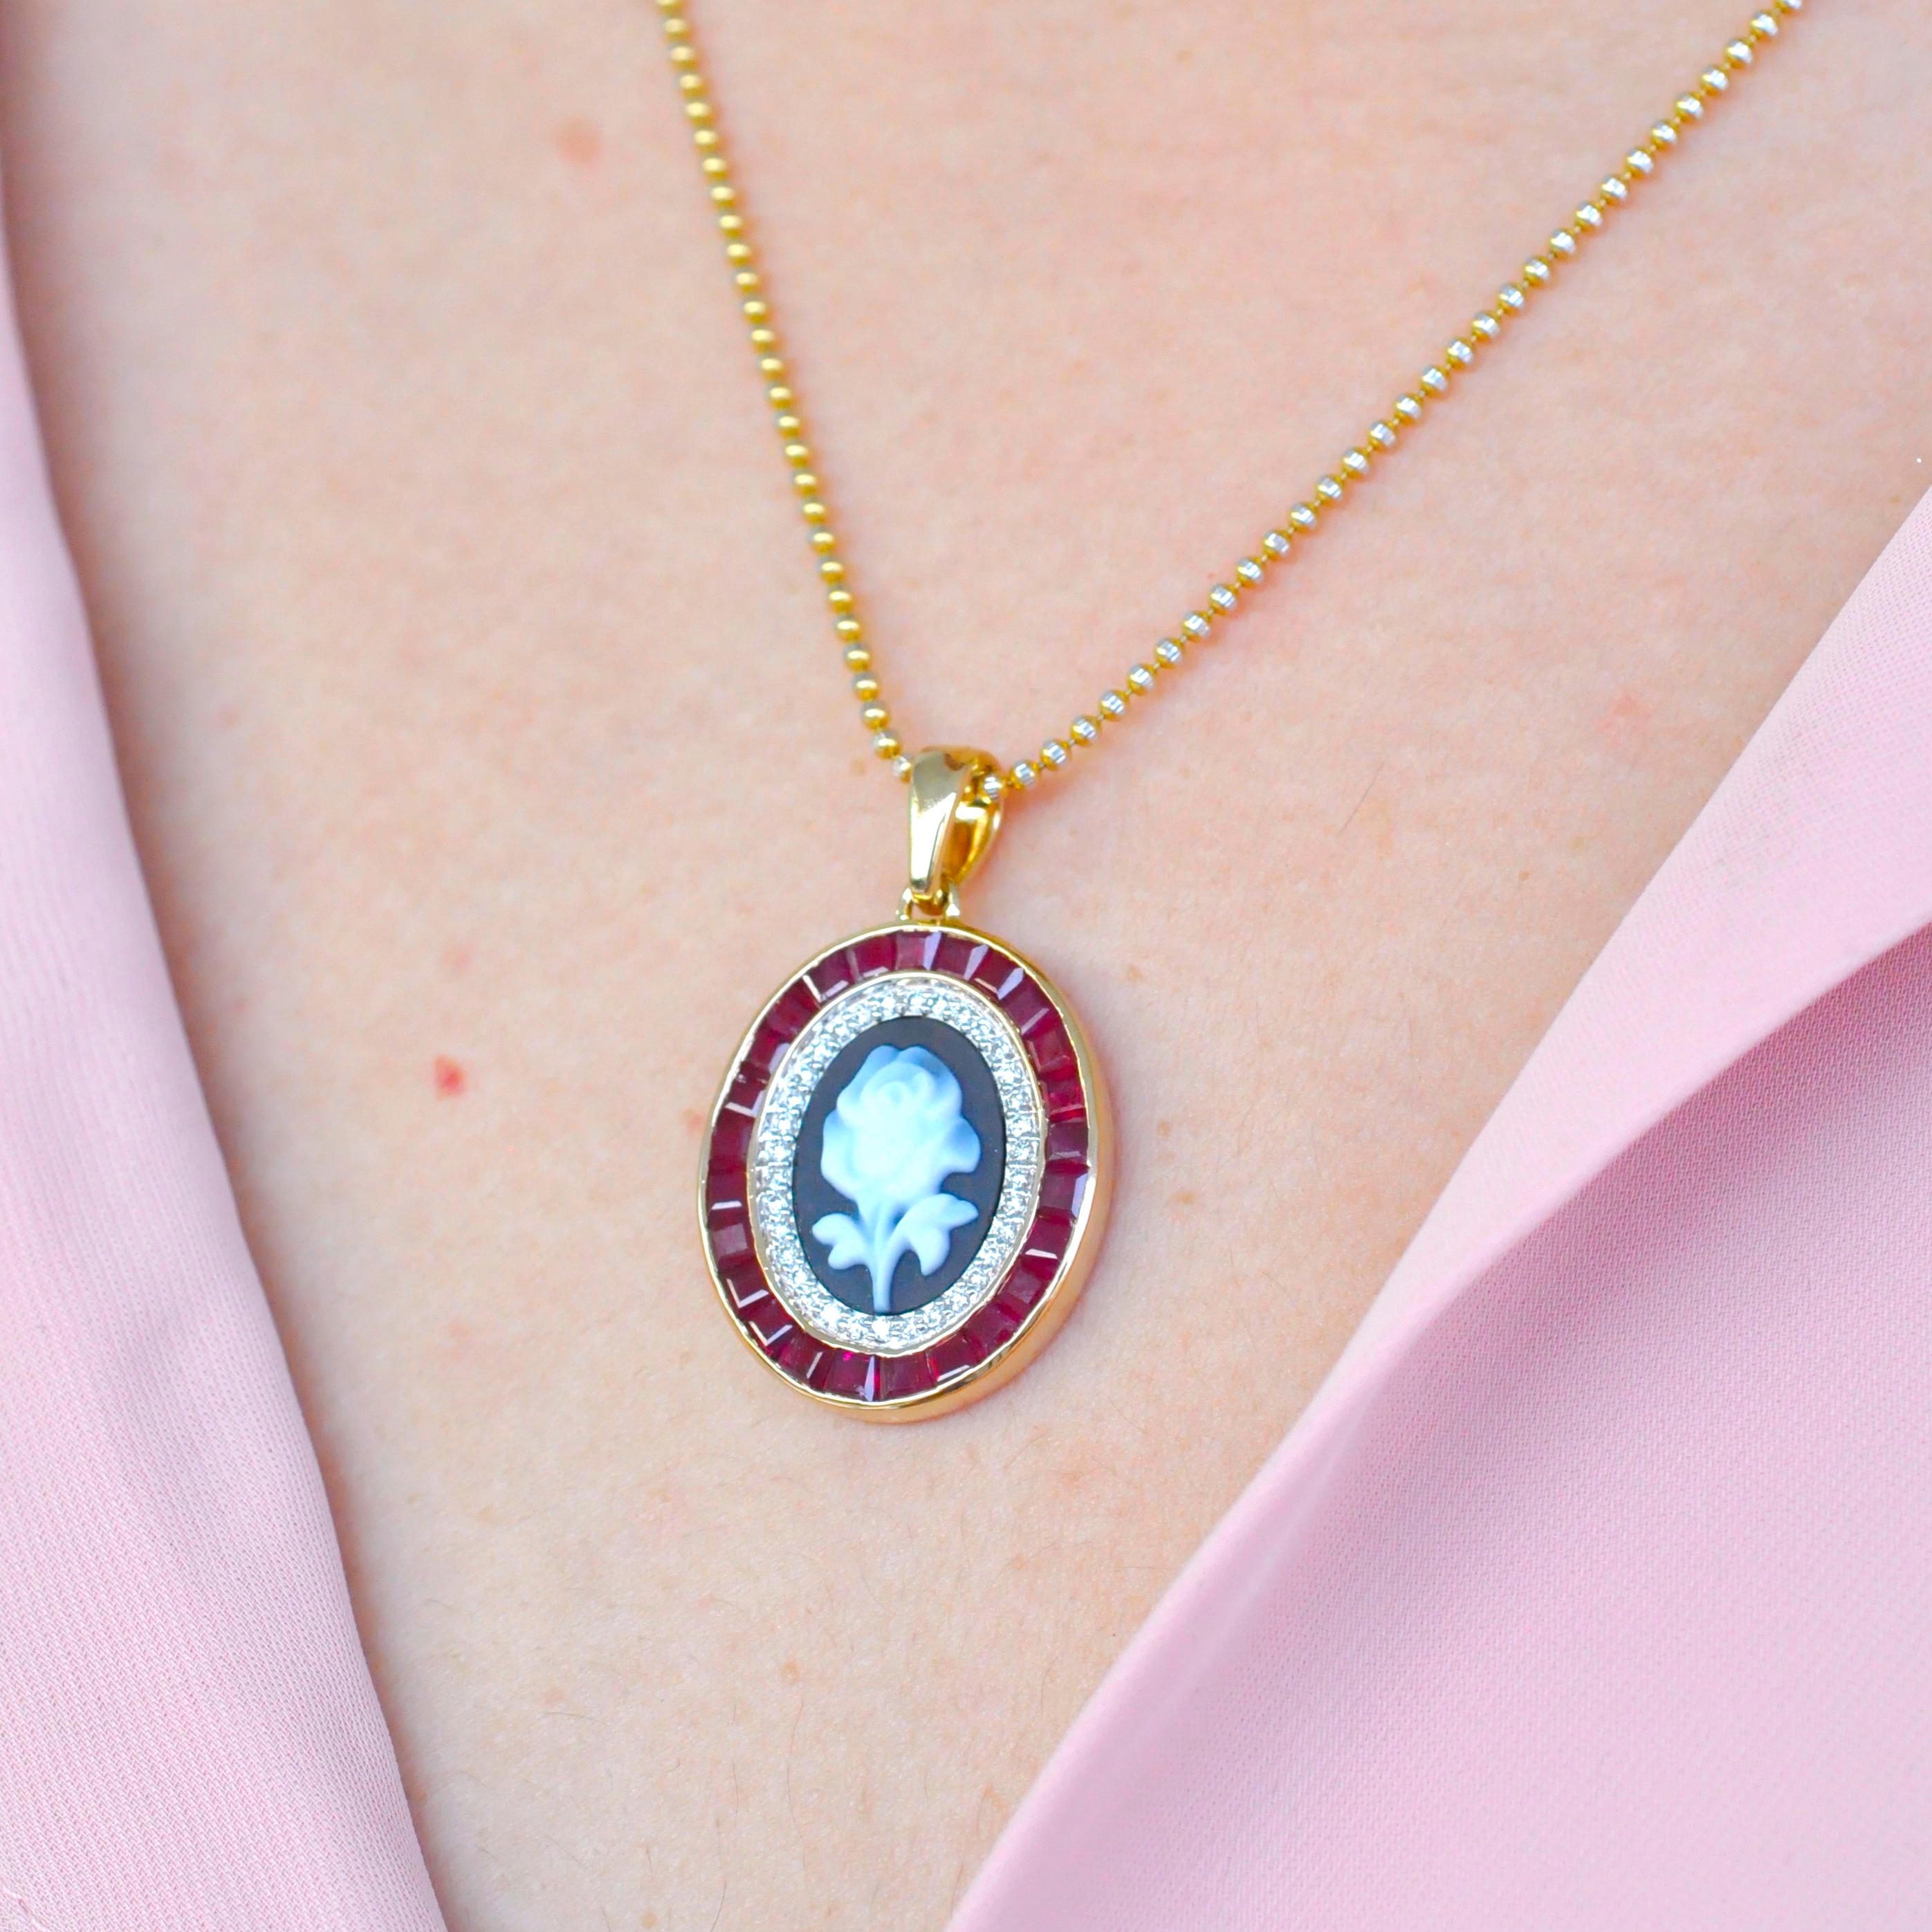 18 karat gold calibre cut burma ruby diamond rose agate cameo pendant necklace.

This beautiful contemporary pendant necklace set in 18k yellow gold features an intricately carved rose cameo by a german cameo artist sitting at the centre. Surrounded